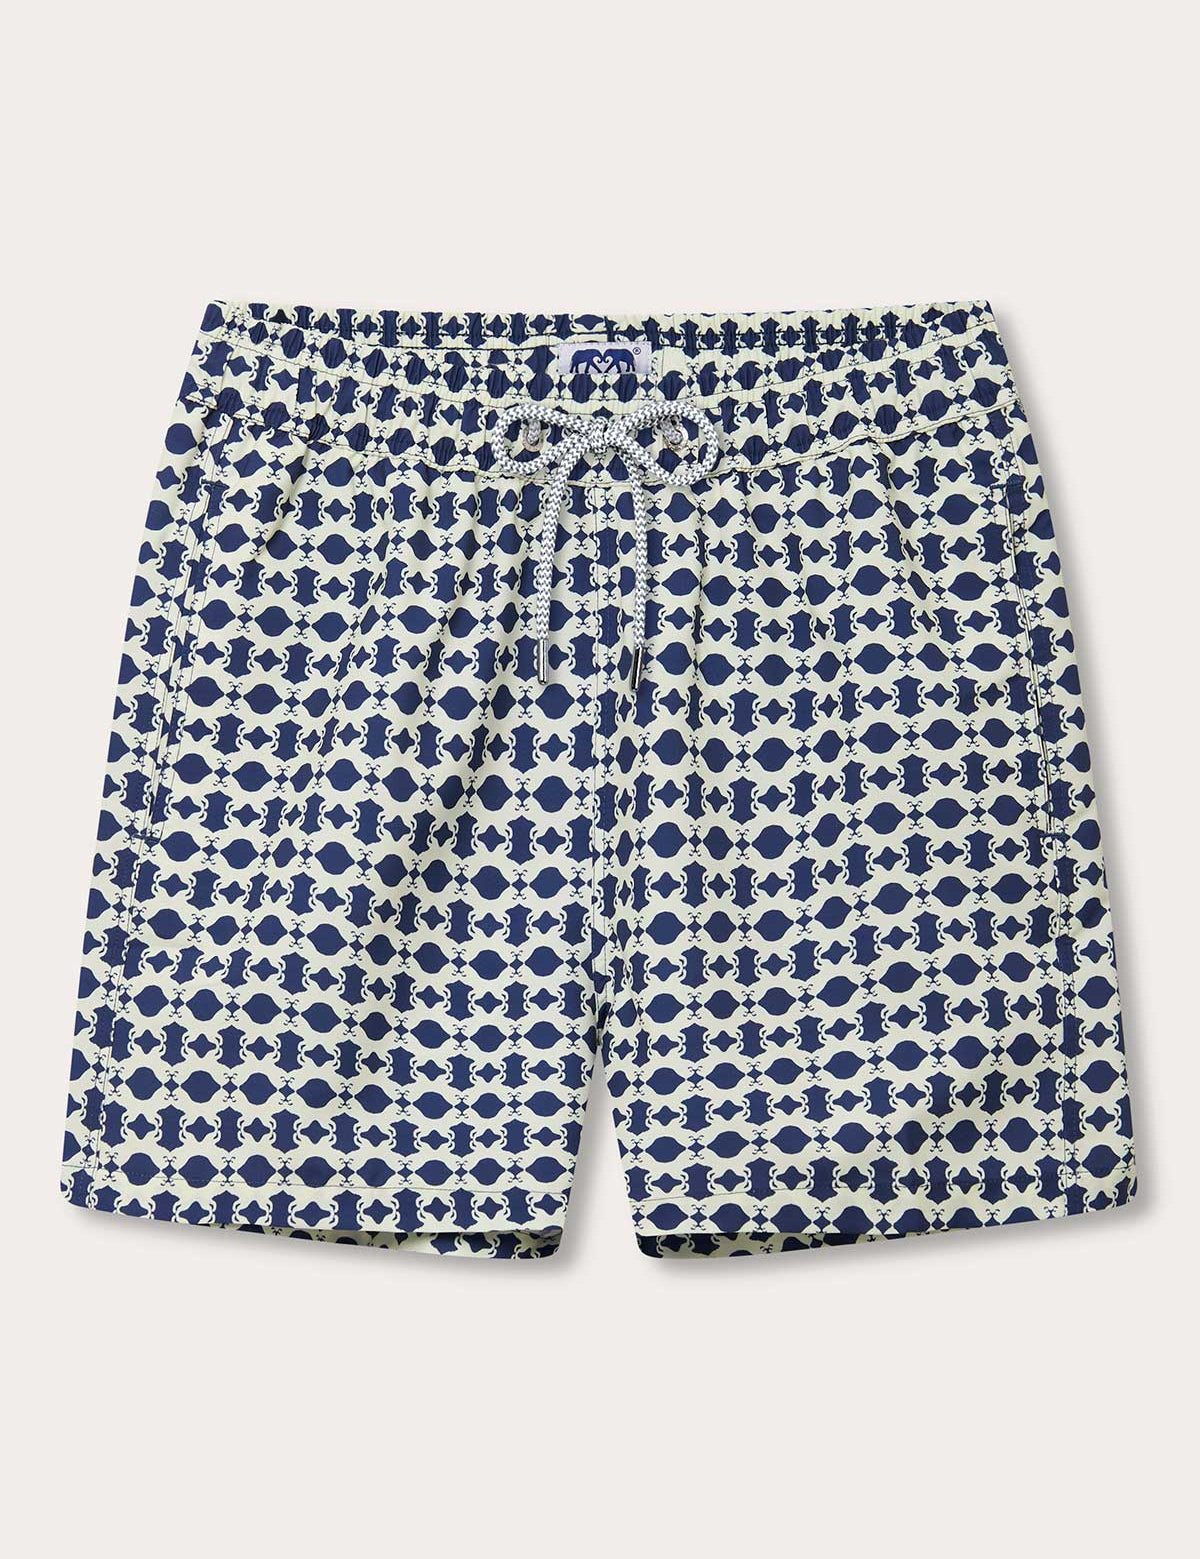 Men's Eye of the Tiger Staniel Swim Shorts front view. The pattern is stone coloured tigers on a Chambray Blue background.